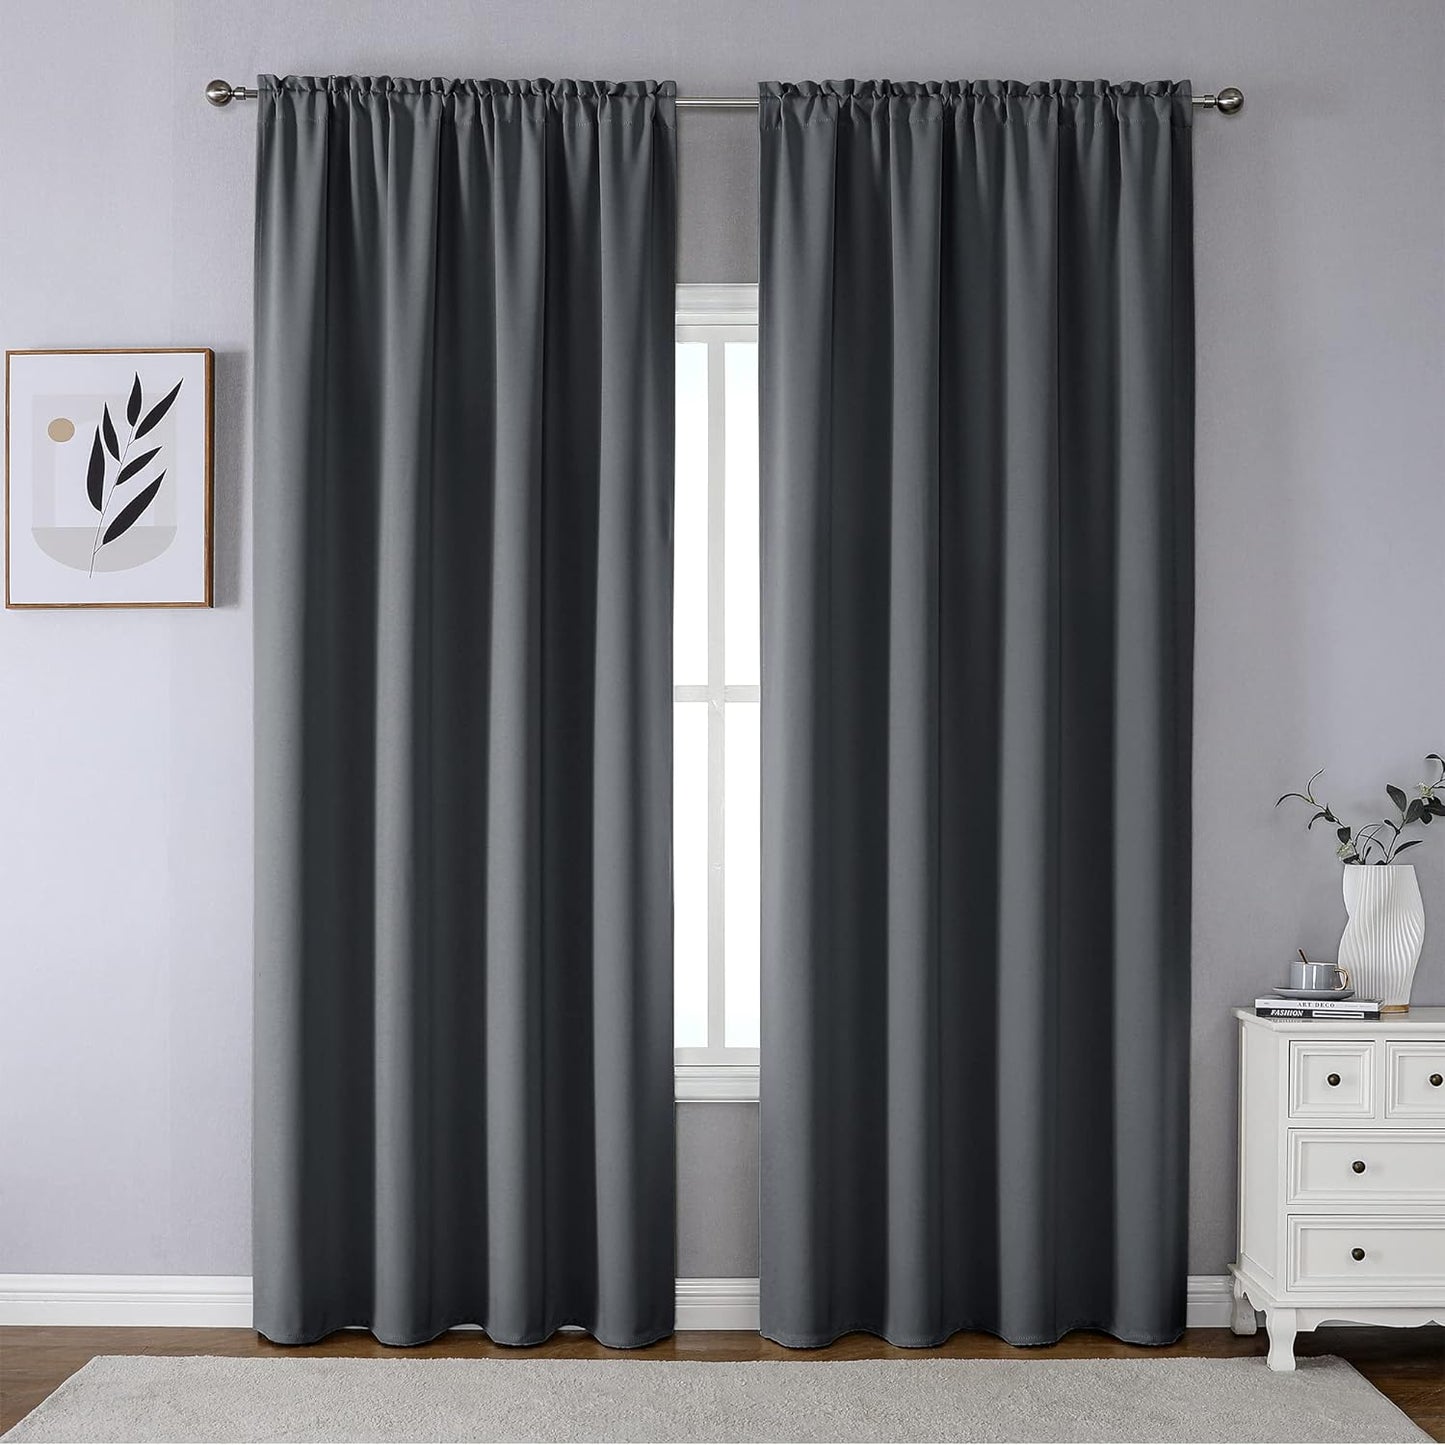 CUCRAF Blackout Curtains 84 Inches Long for Living Room, Light Beige Room Darkening Window Curtain Panels, Rod Pocket Thermal Insulated Solid Drapes for Bedroom, 52X84 Inch, Set of 2 Panels  CUCRAF Dark Grey 52W X 95L Inch 2 Panels 